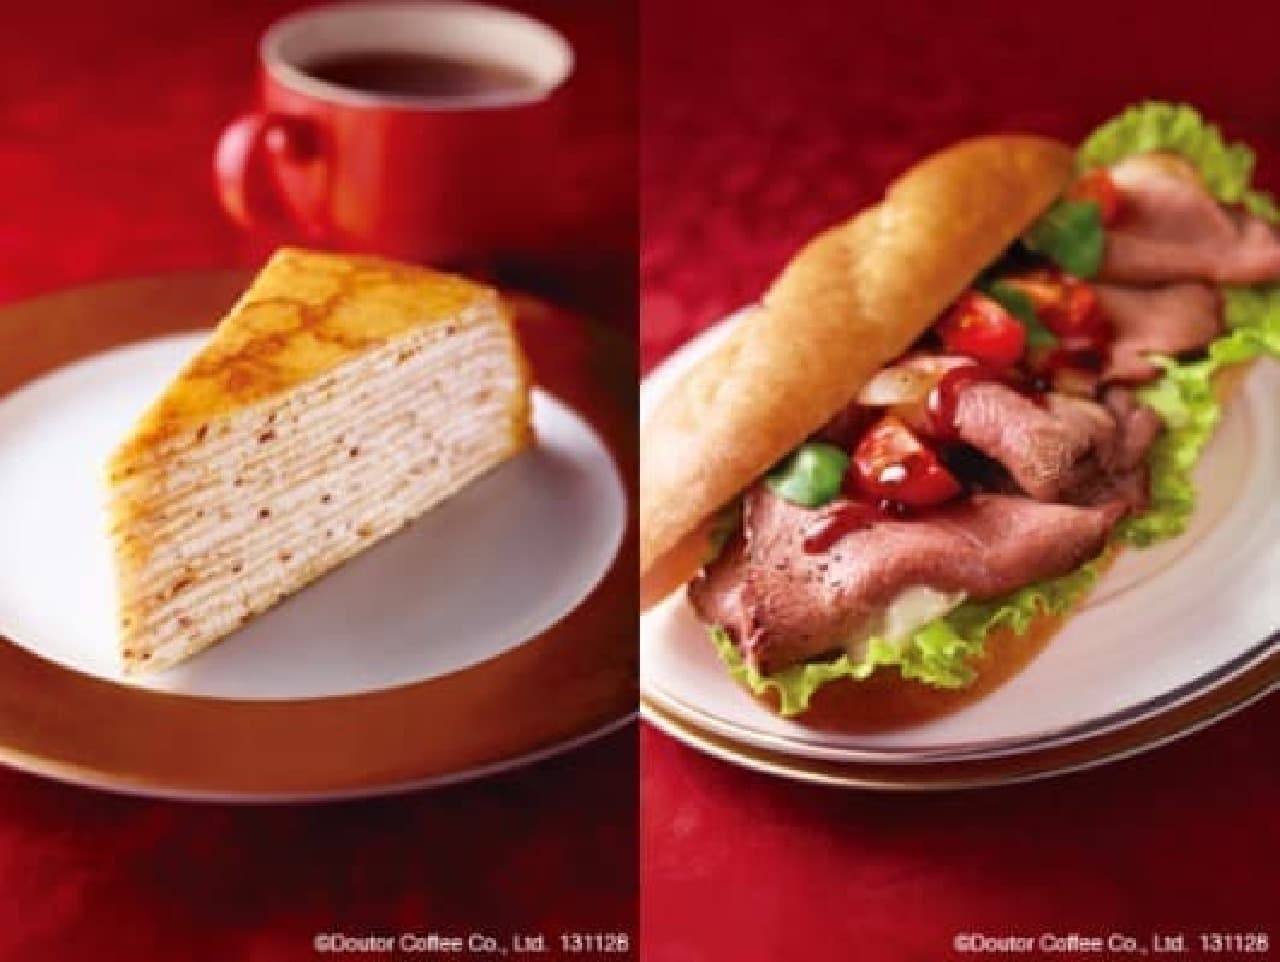 Lamb raisin mille crêpes (left), luxury Milano sandwich charcoal-grilled roast beef (right)